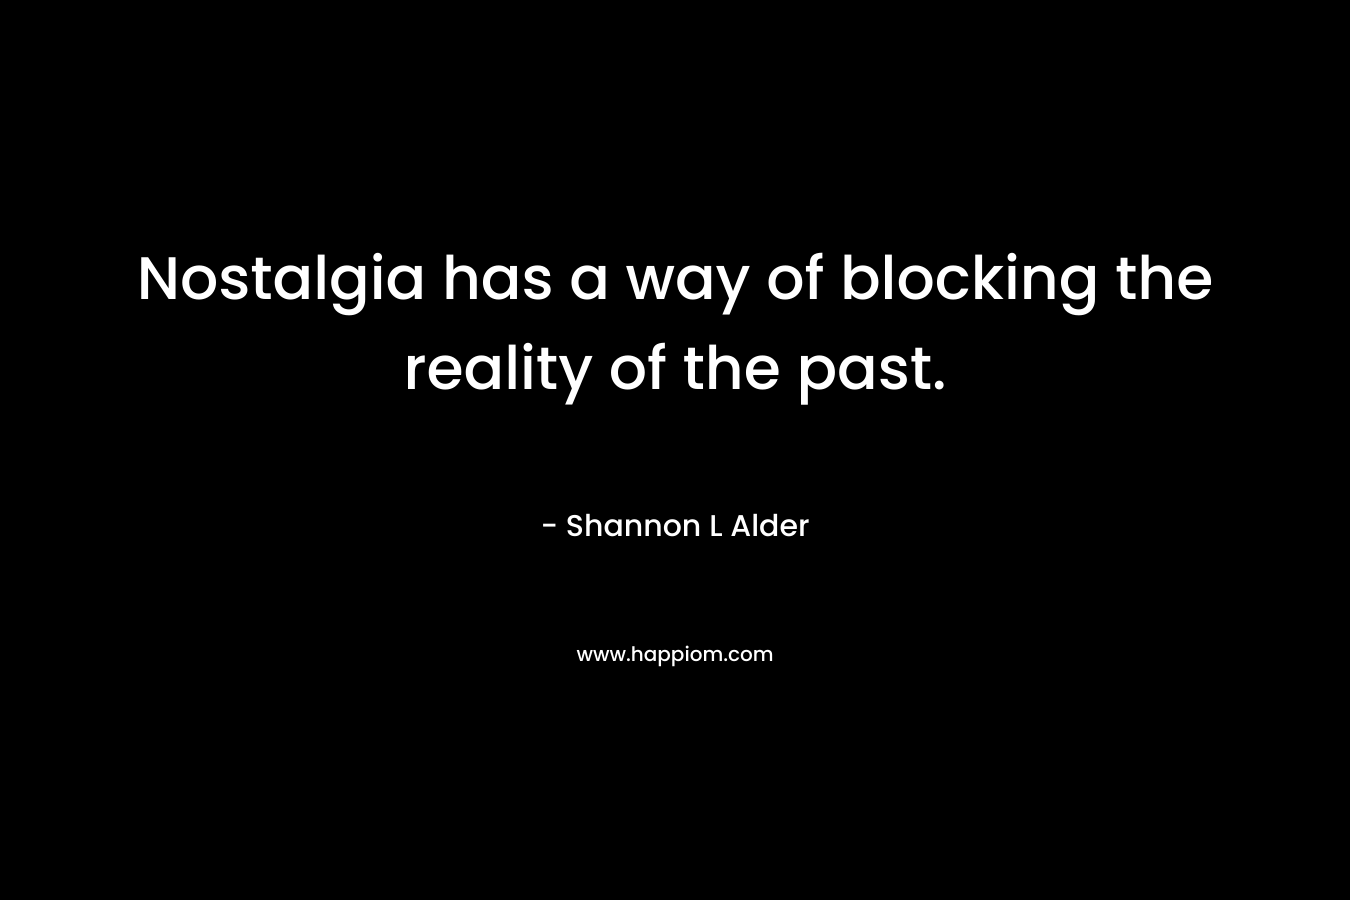 Nostalgia has a way of blocking the reality of the past.